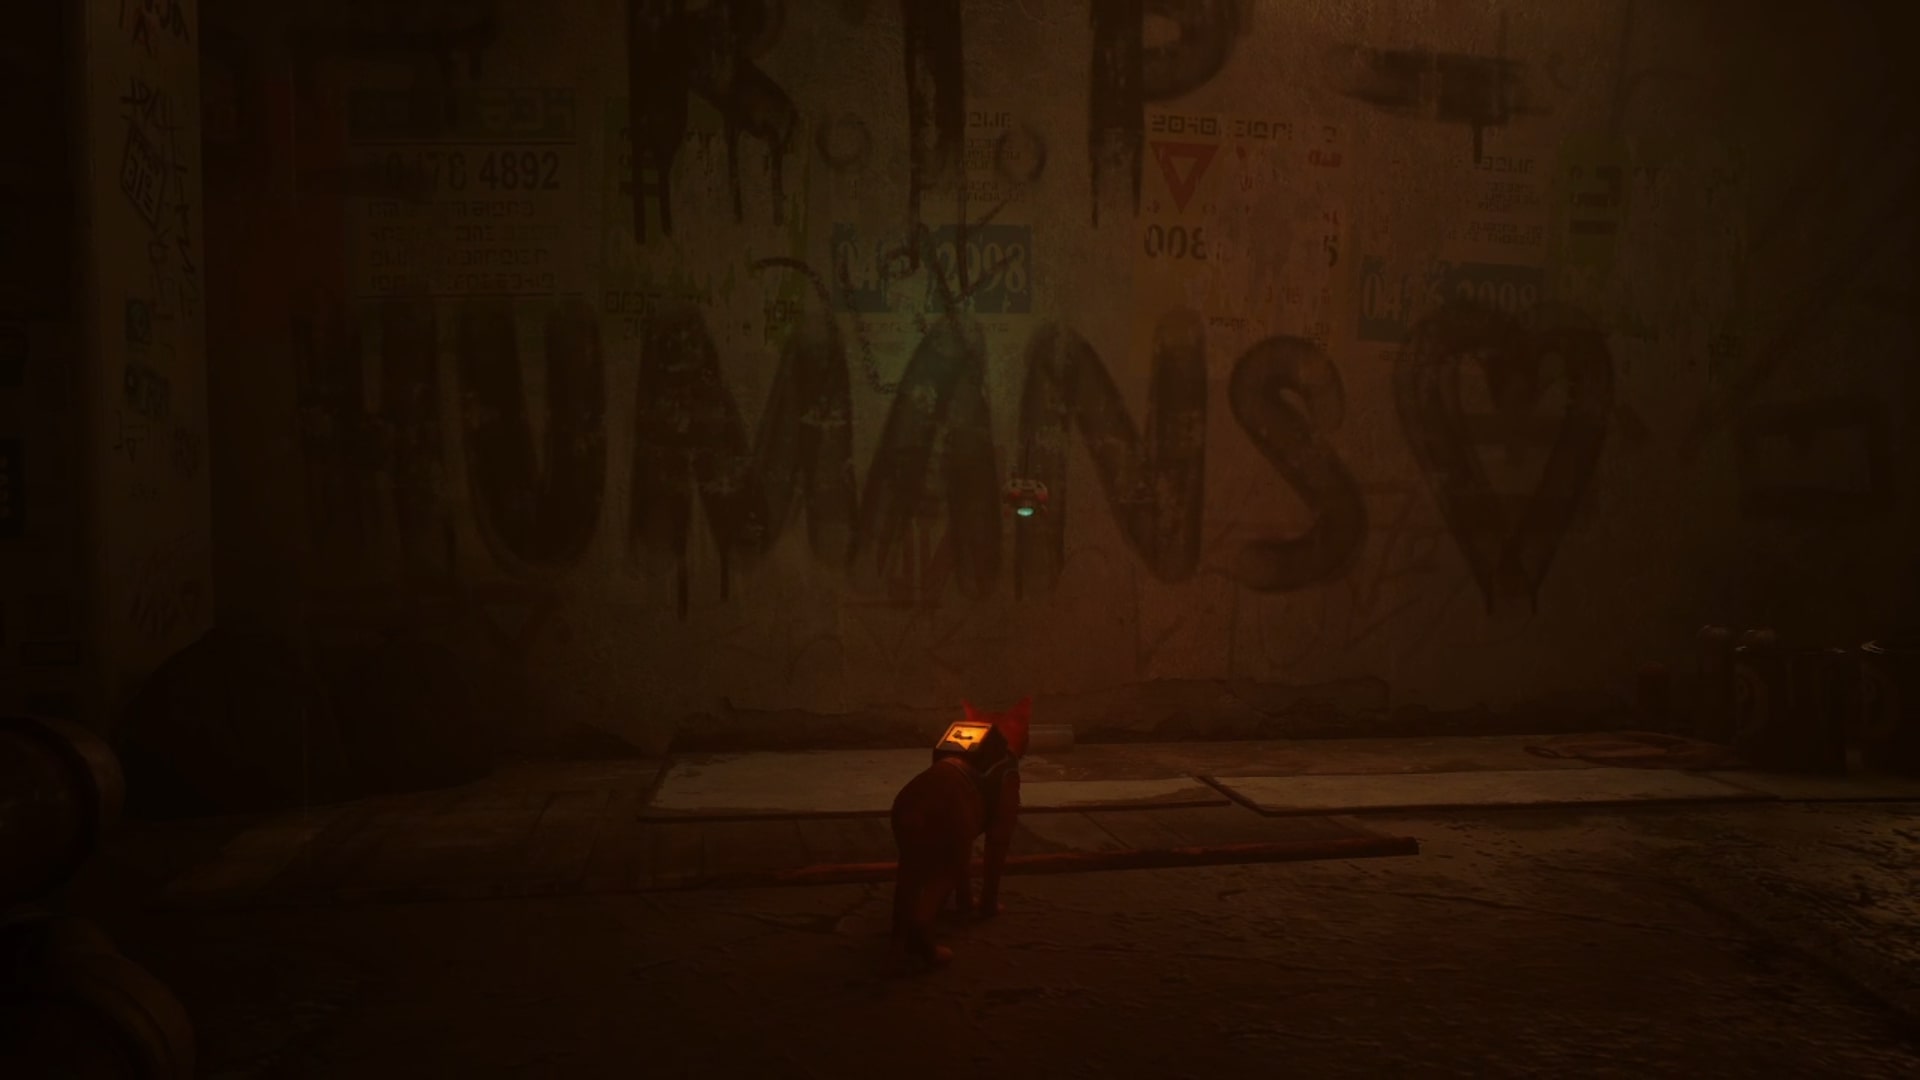 Stray memories guide: The RIP HUMANS <3 graffiti is emblazoned across a concrete wall that’s covered in faded posters for businesses once owned by humans